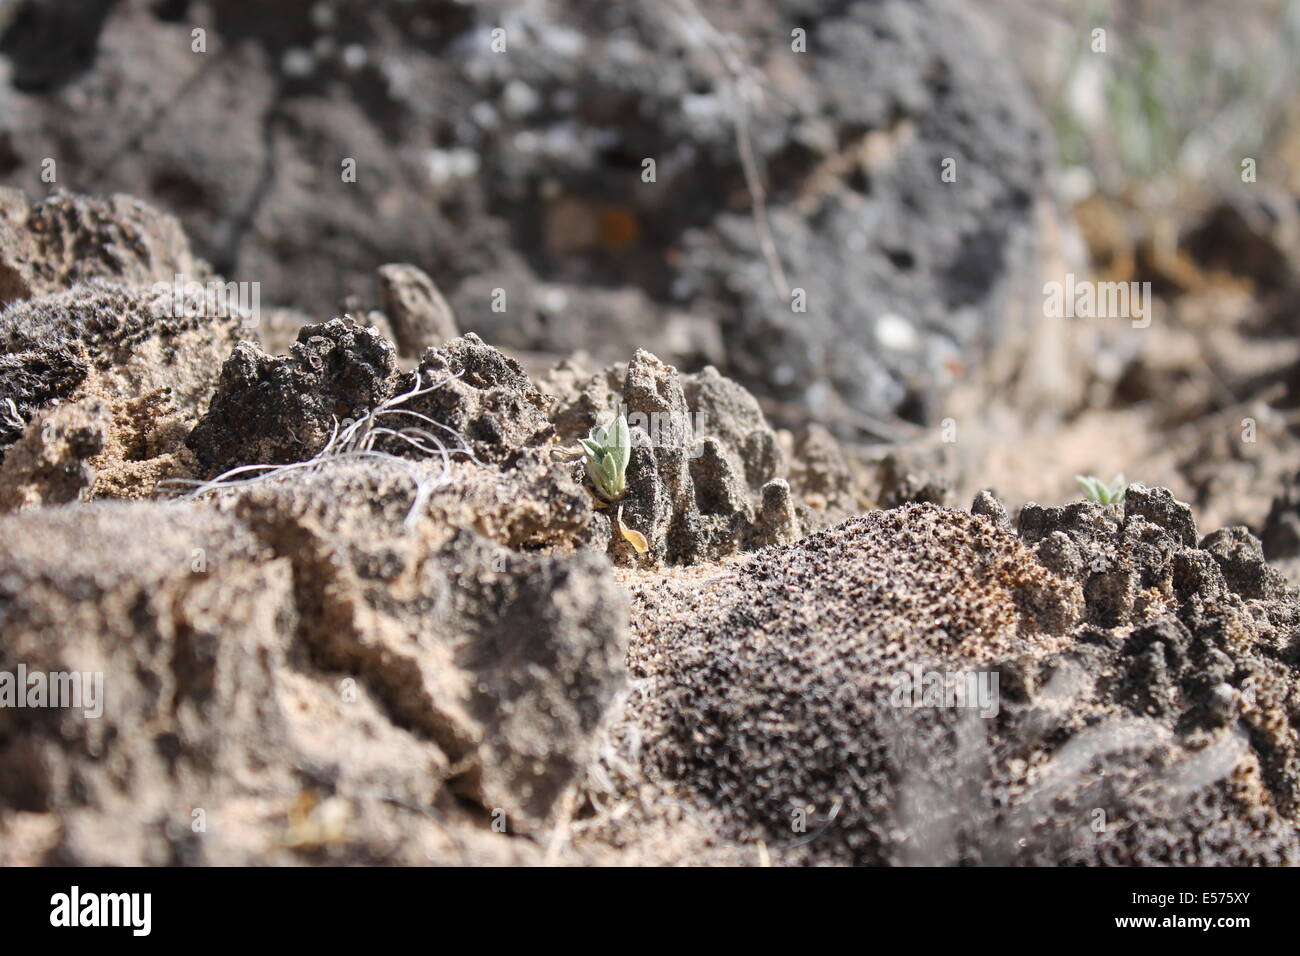 A plant grows out of cryptobiotic crust in New Mexico Stock Photo